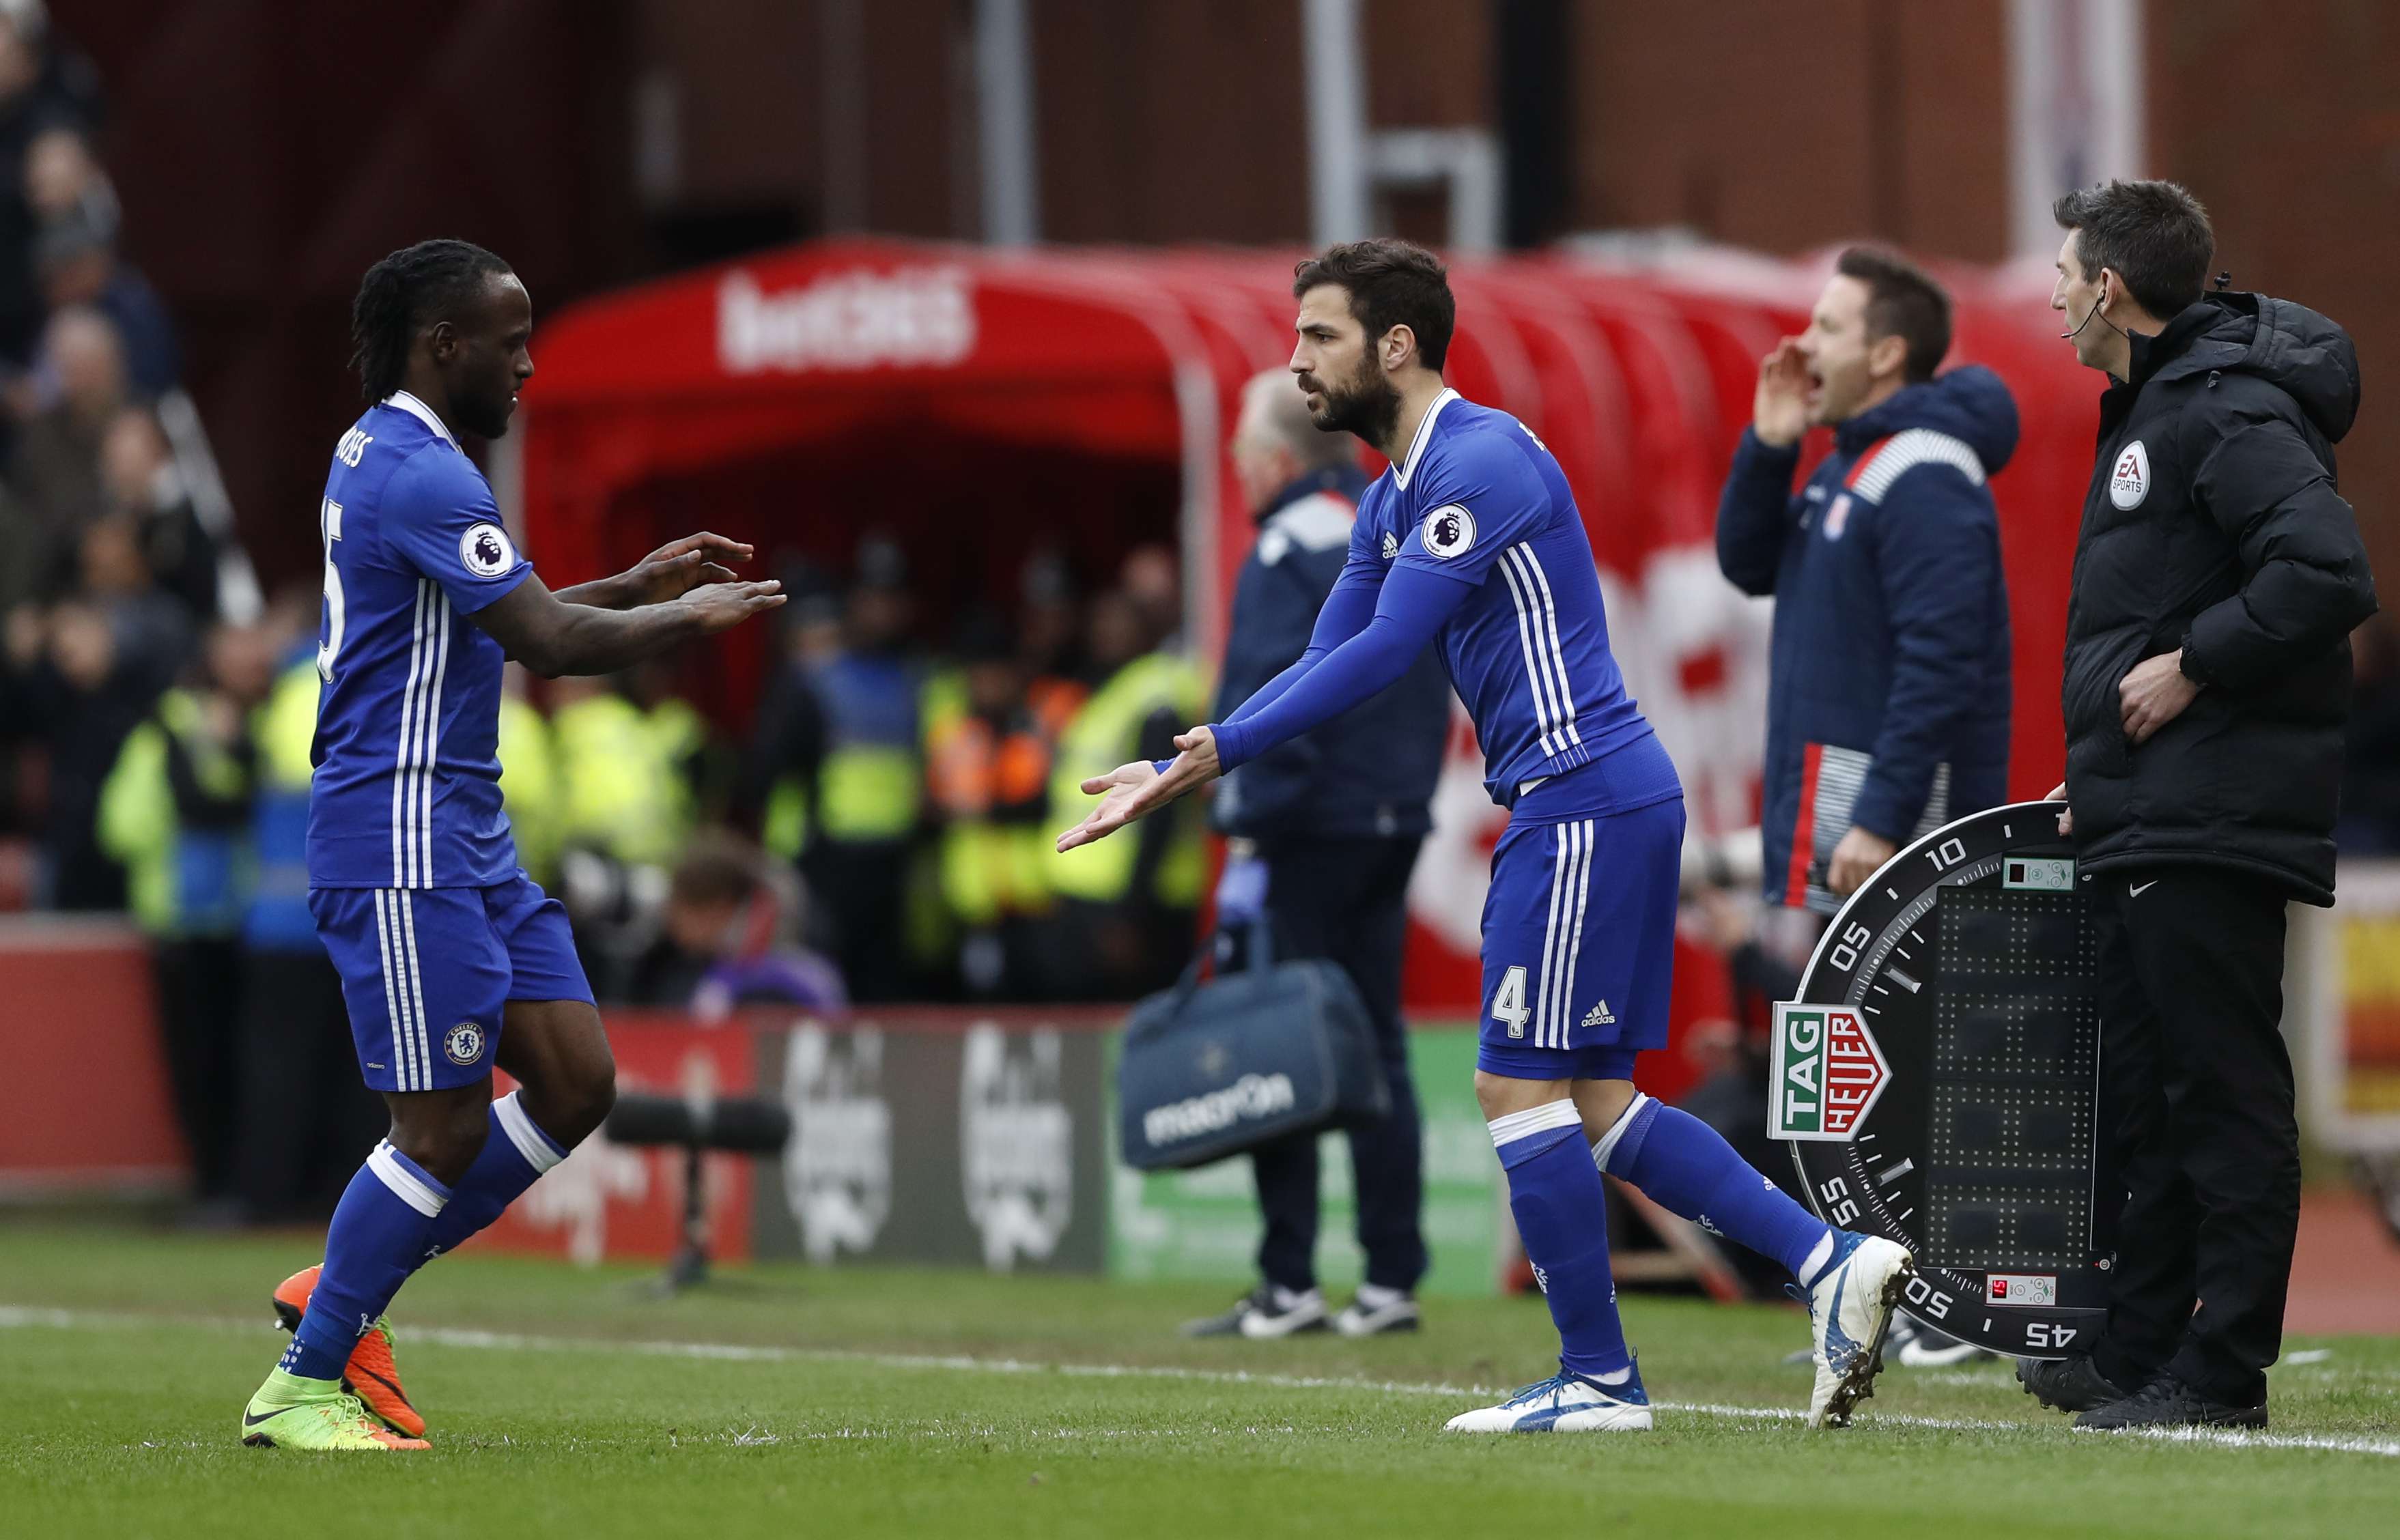 Chelsea's Cesc Fabregas comes on as a substitute to replace Victor Moses. Photo: Reuters